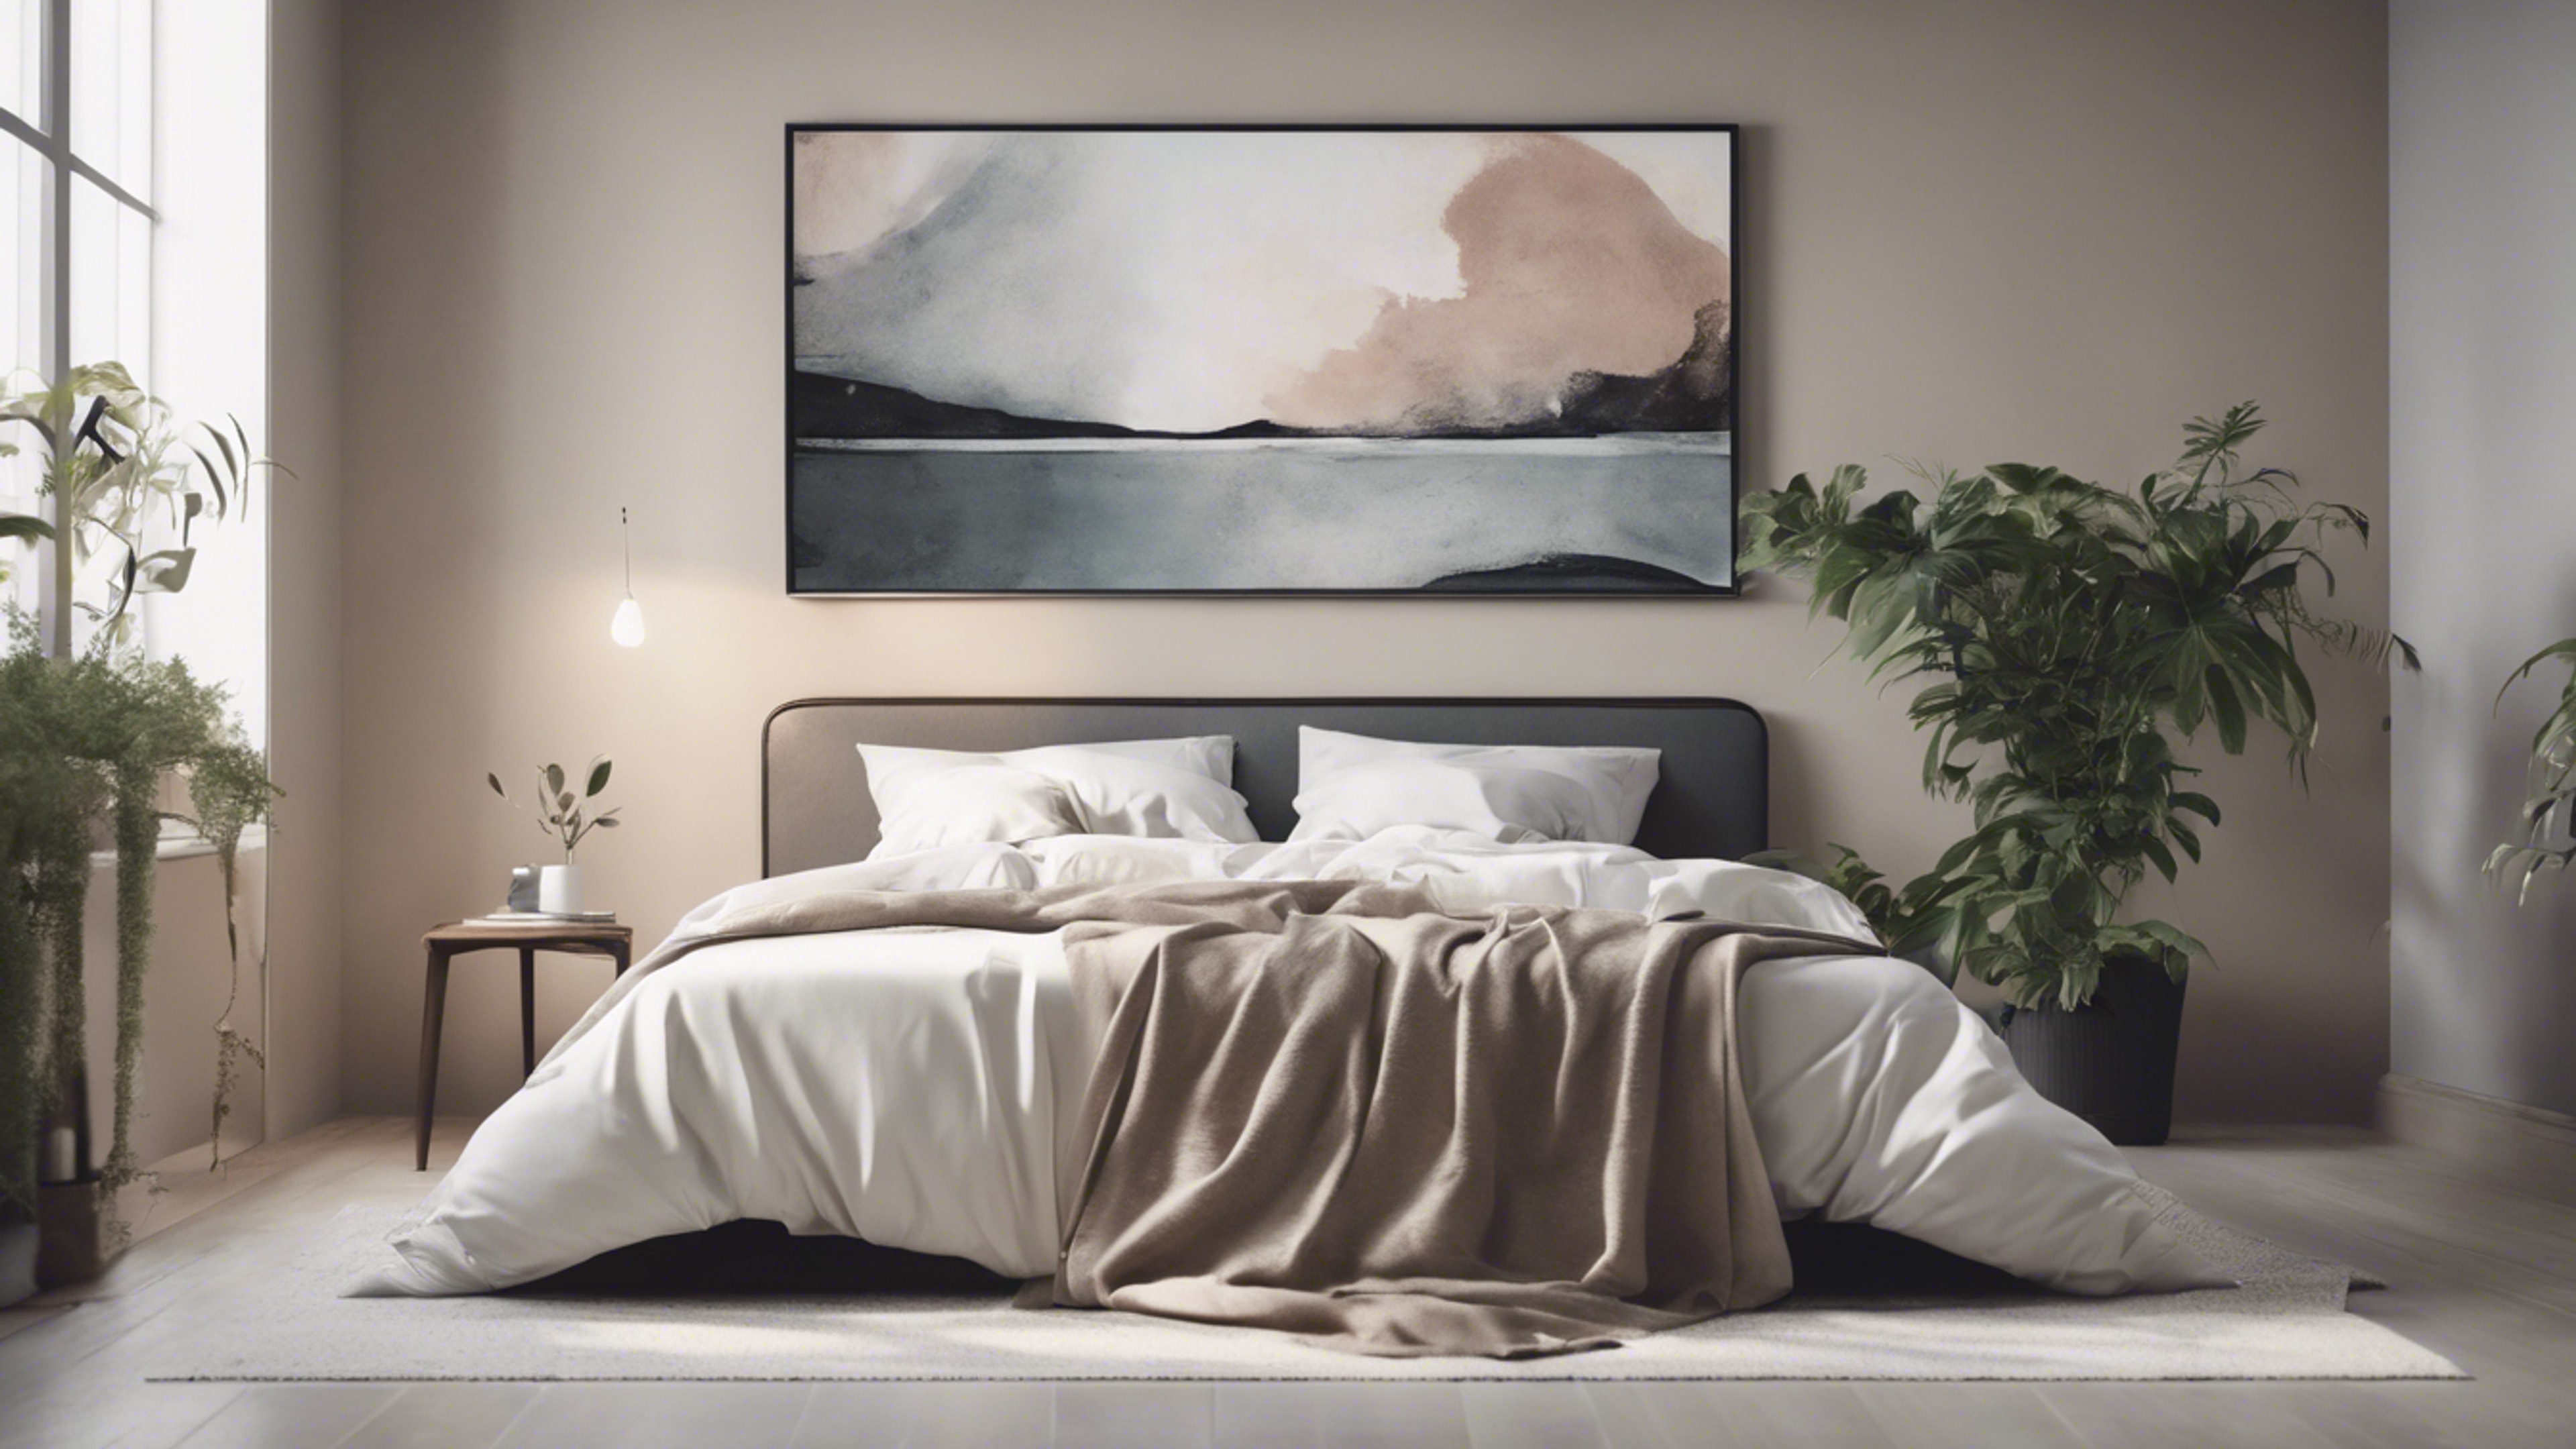 Minimalist bedroom in muted tones with a simple queen-sized bed, a potted plant, and an abstract painting. Kertas dinding[015f6f42387b4ed28c5e]